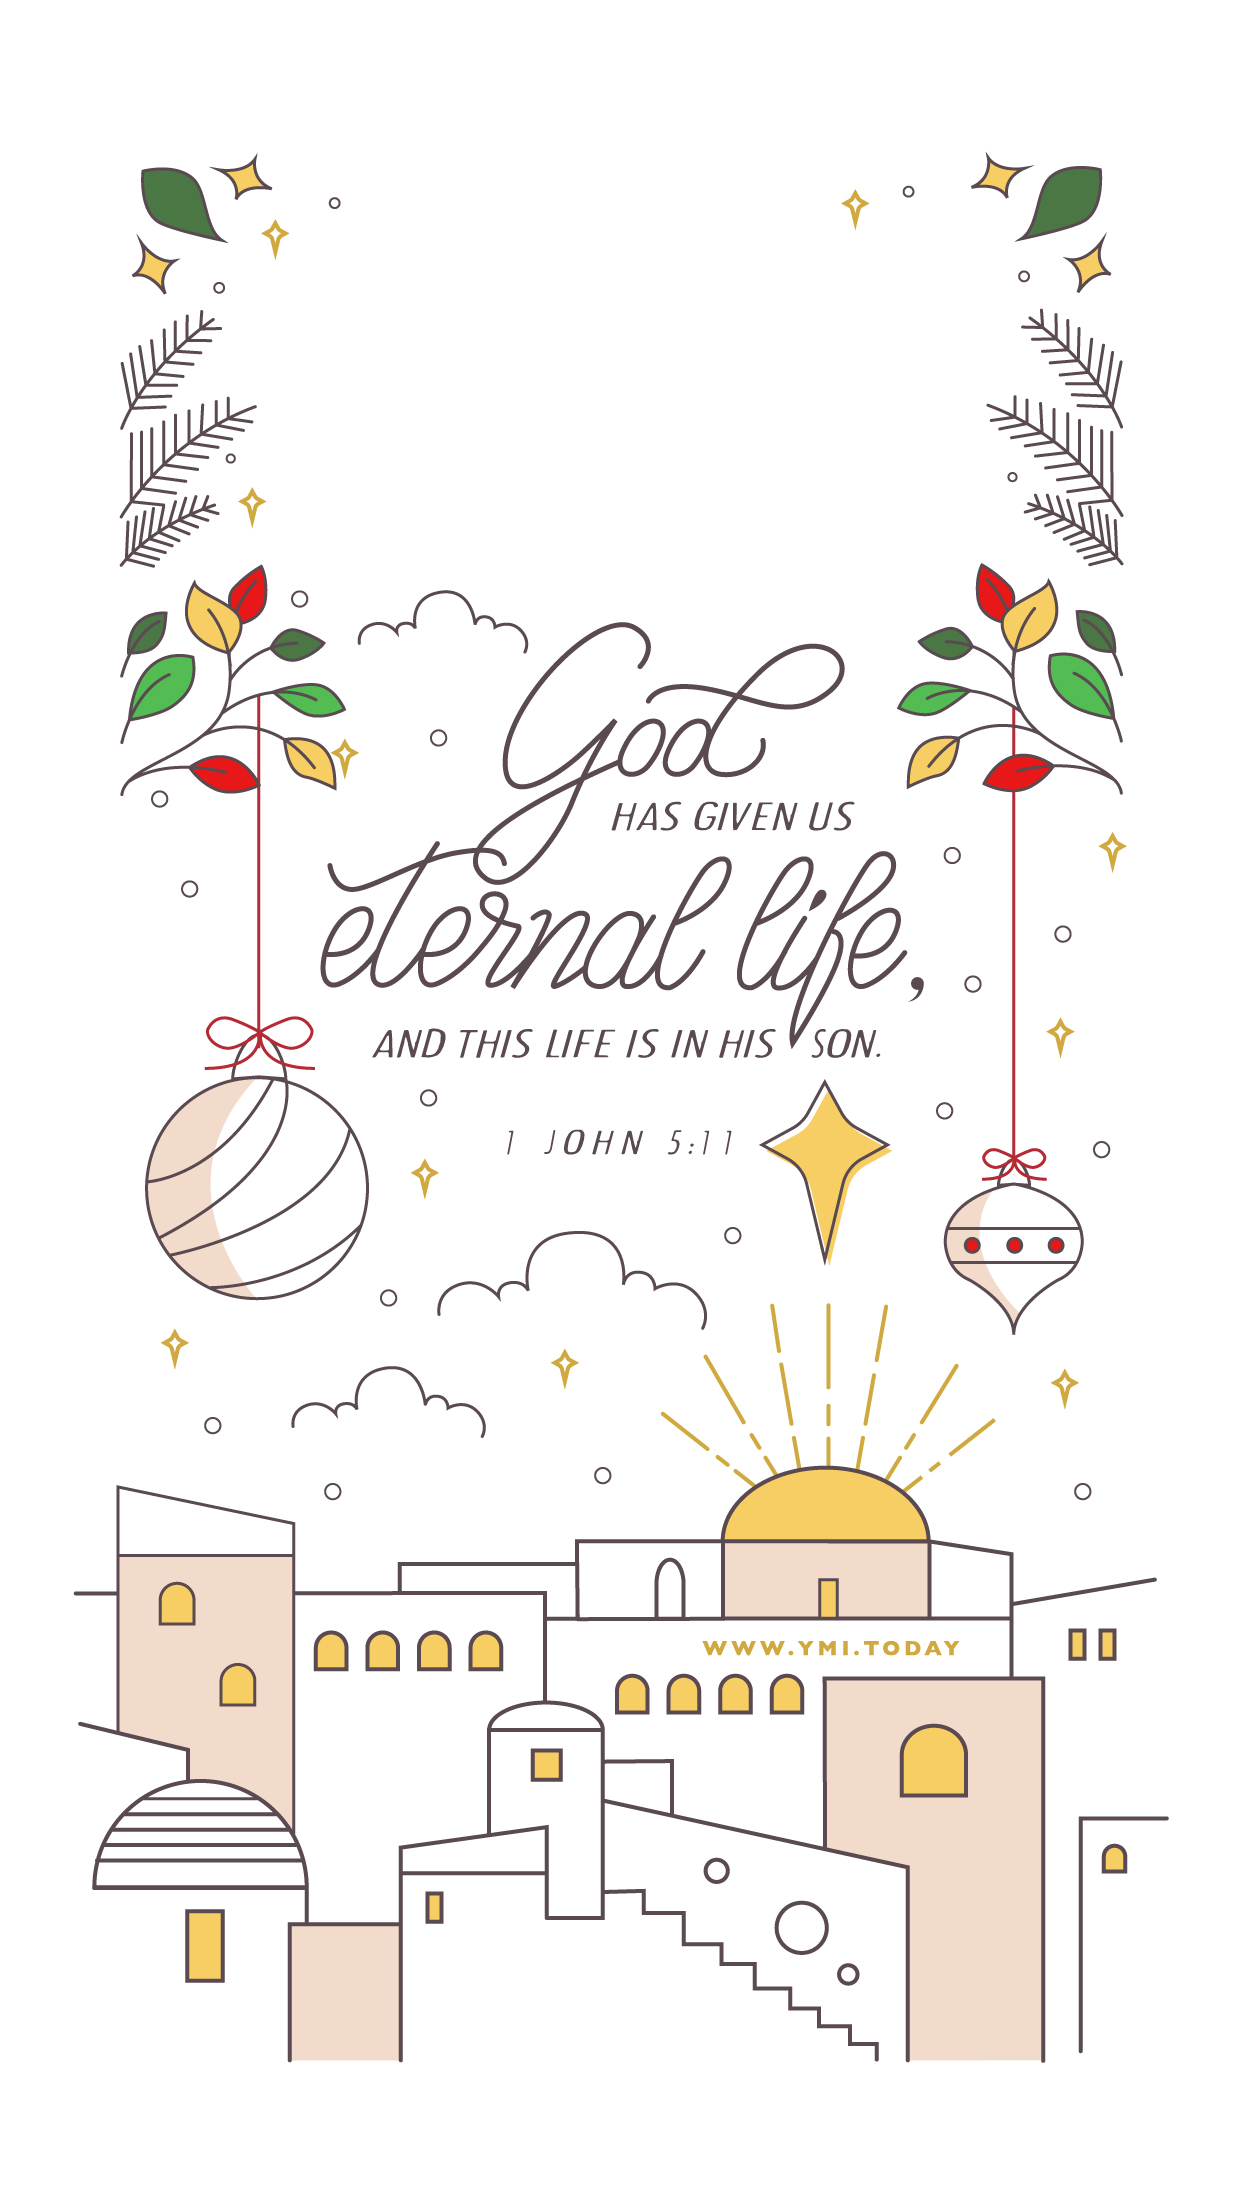 YMI December 2018 Phone Lockscreen - God has given us eternal life and this life is in His Son. - 1 John 5:11